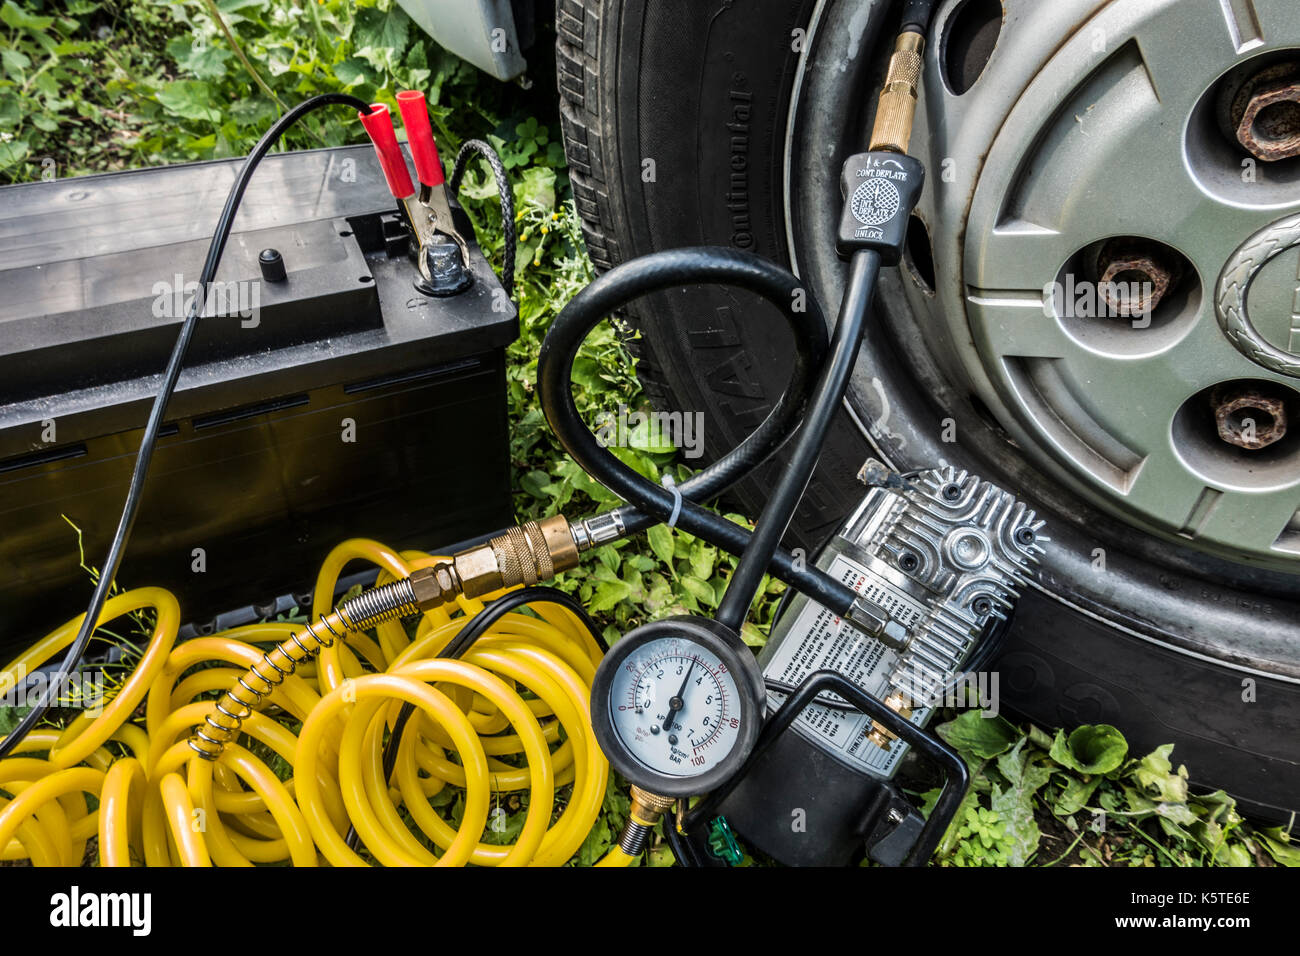 12 volt professional compressor inflator attached to tyre, with brass fittings, coiled air hose and crocodile clips connected to battery. England, UK. Stock Photo